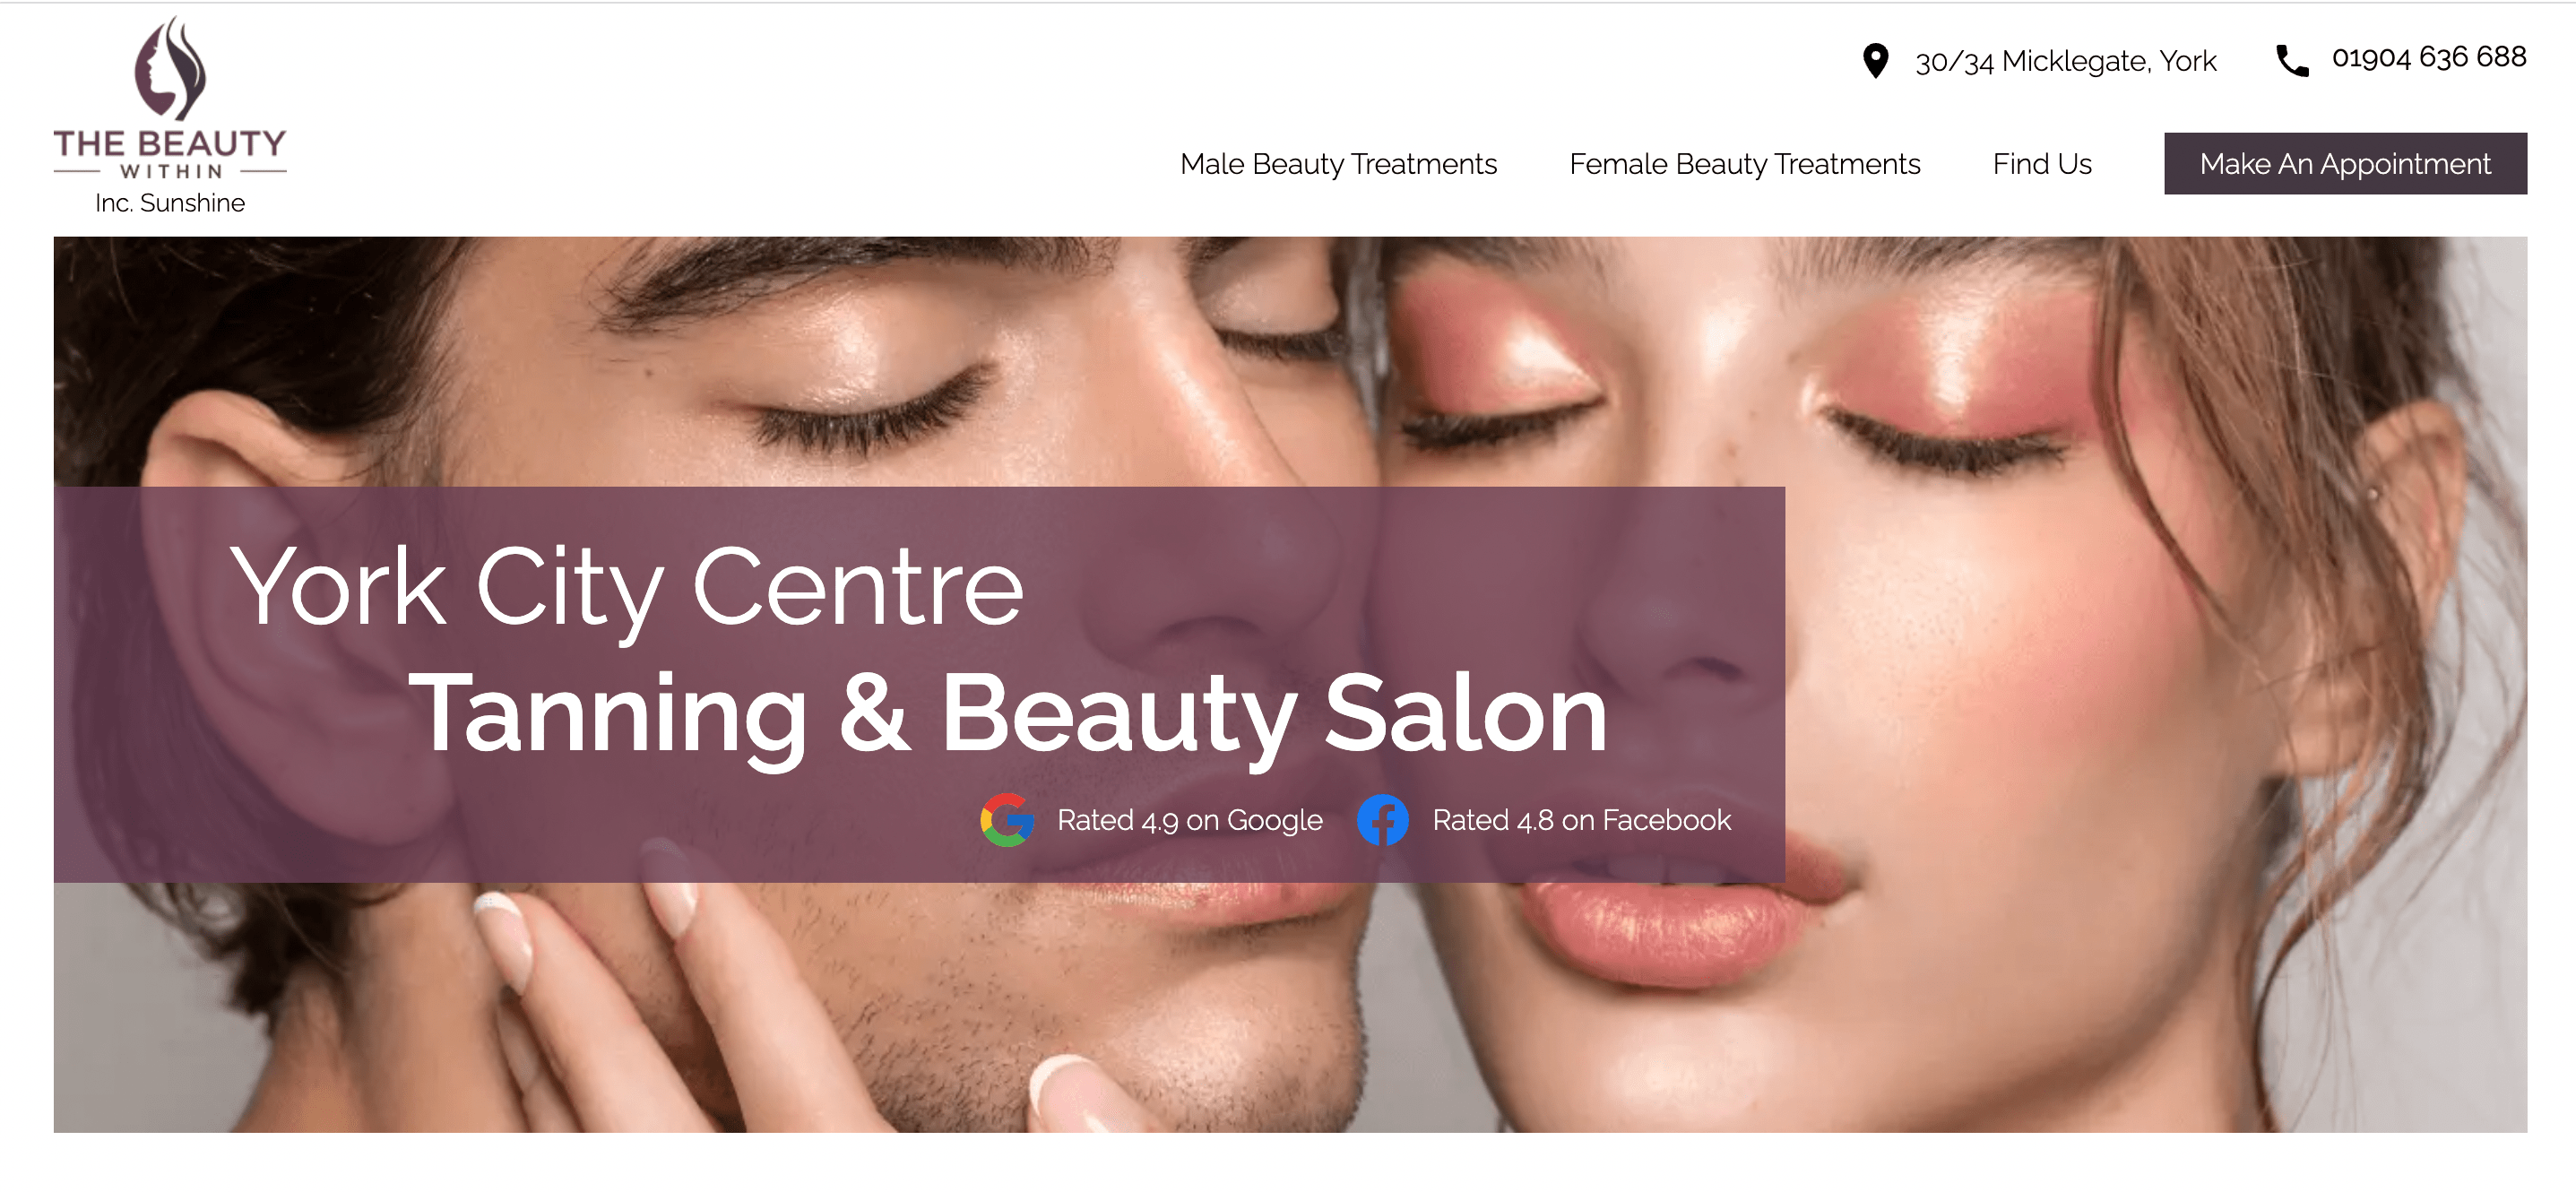 The Beauty Within Website Homepage on Desktop